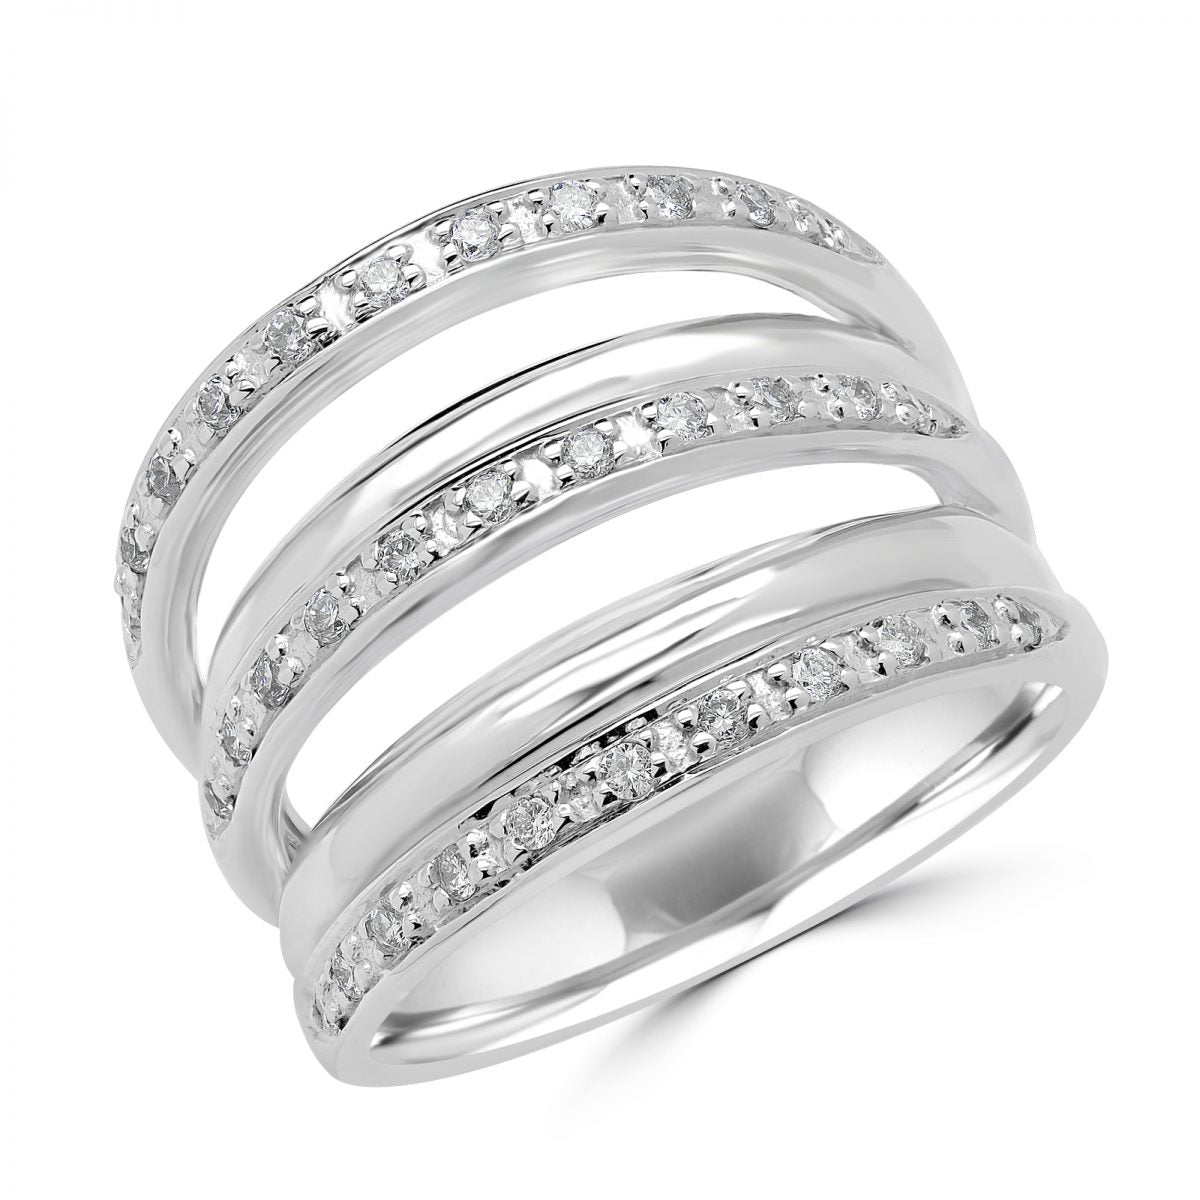 Fancy 5 row cocktail ring 0.33 (ctw) in 10k white gold